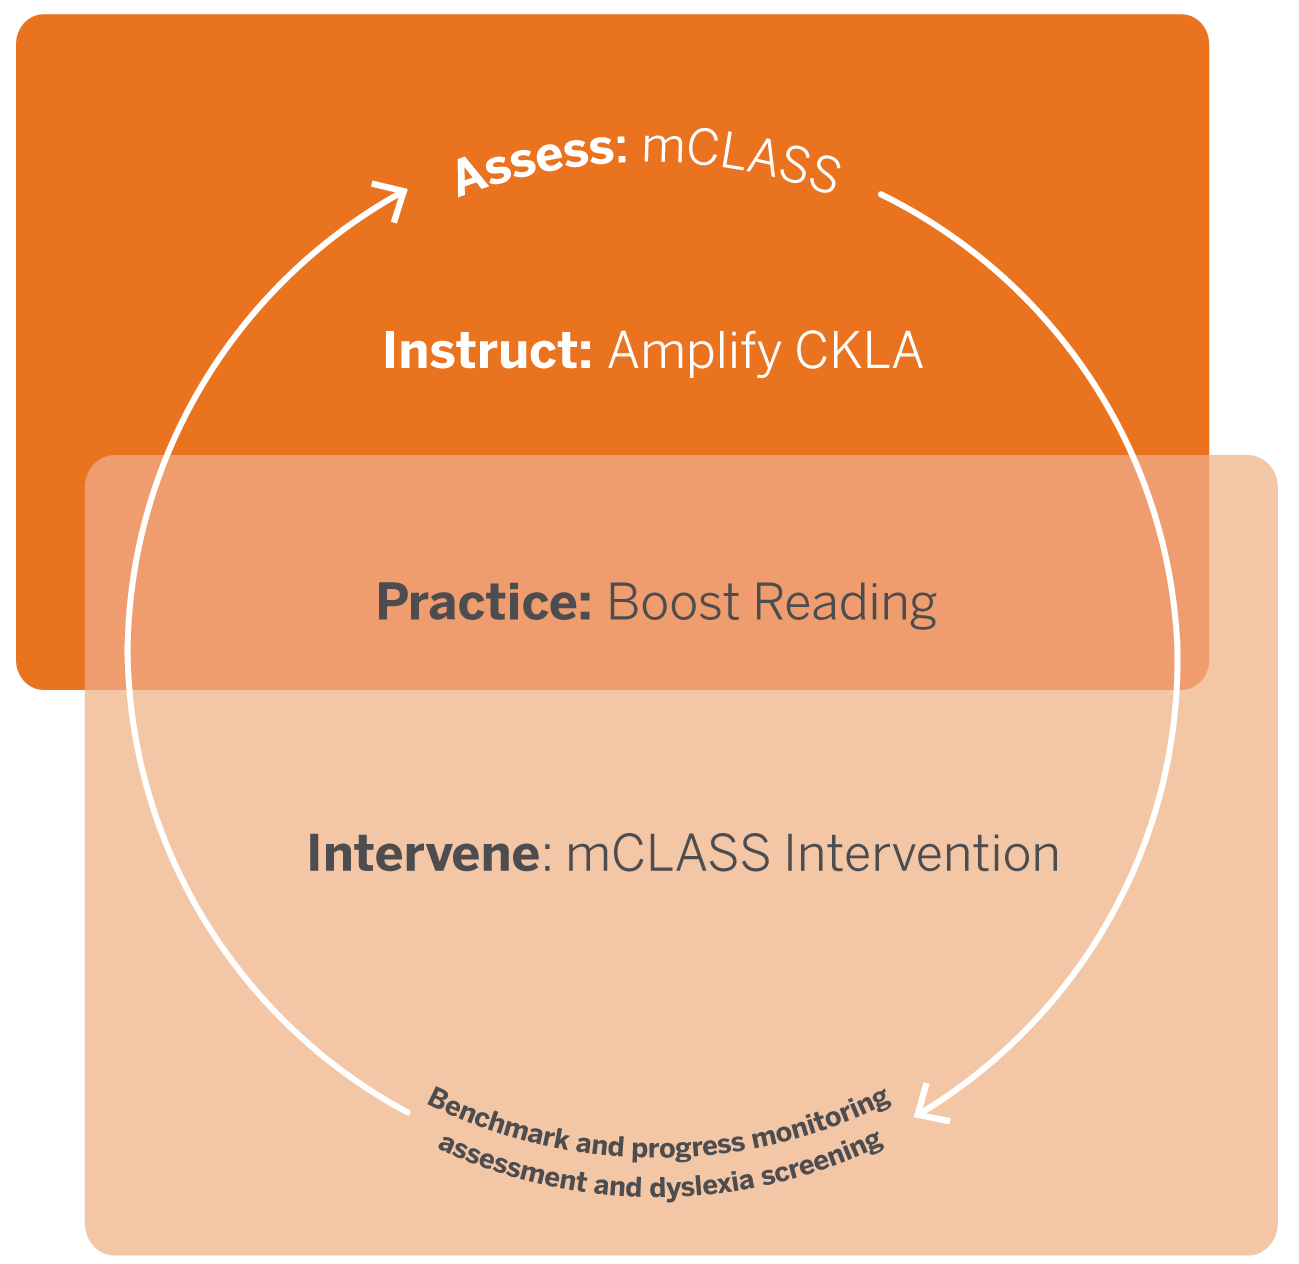 Diagram illustrating a K–5 literacy cyclical educational process with three phases: assess with mclass, practice with boost reading, and intervene with mclass intervention.